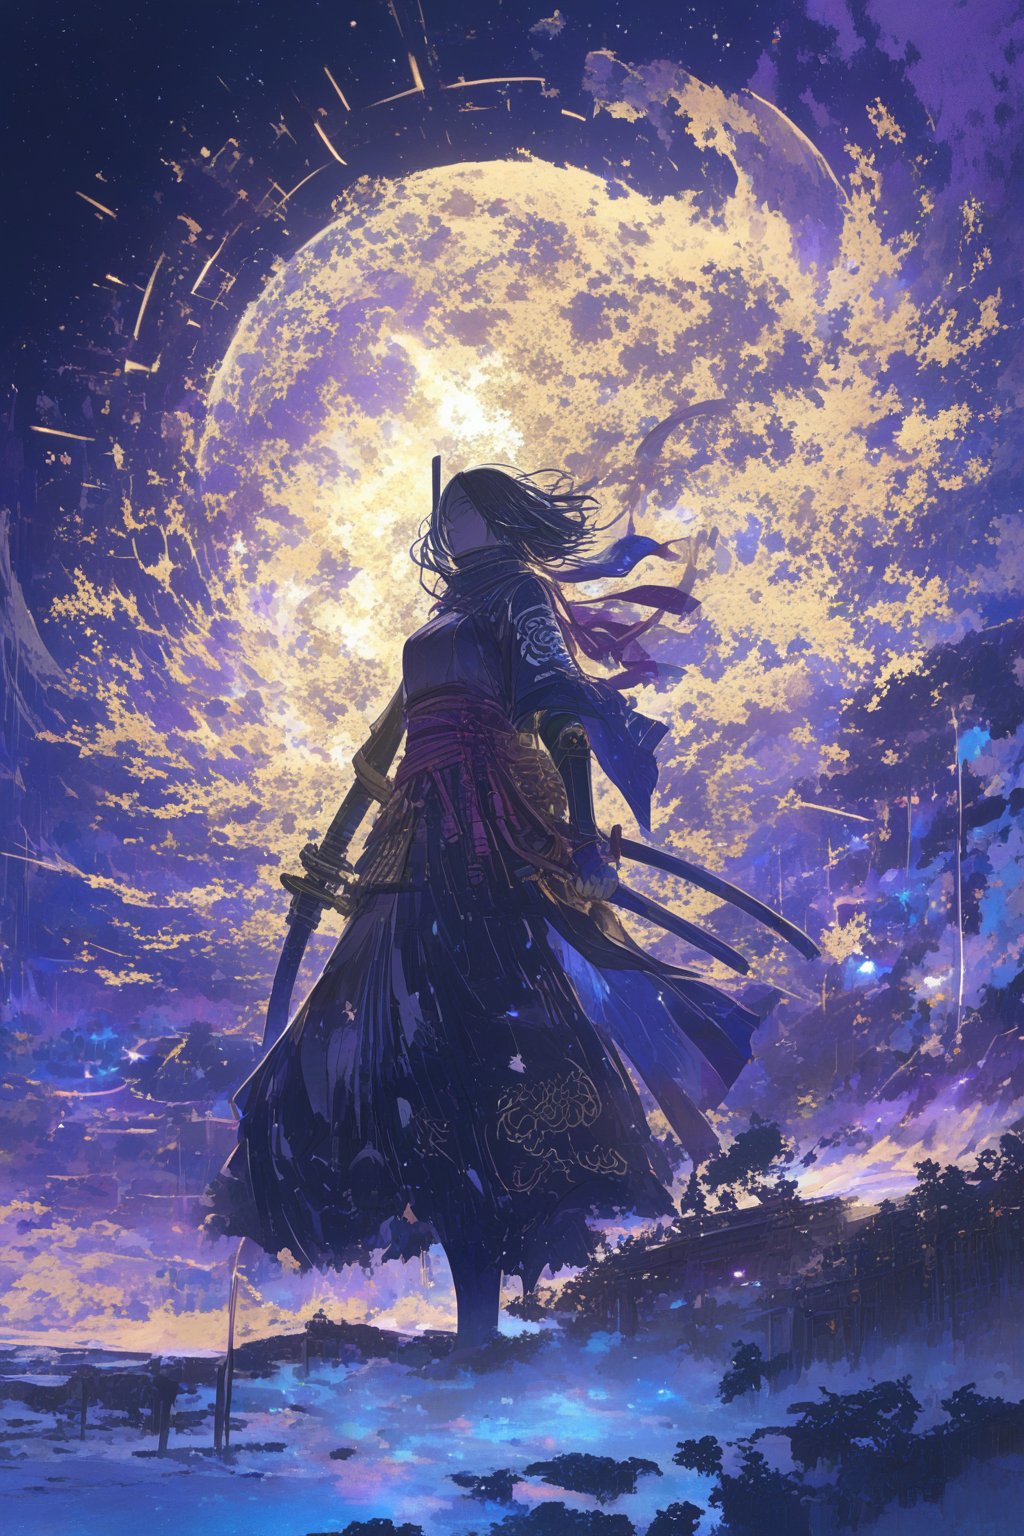 Official Art, Unity 8K Wallpaper, Extreme Detailed, Beautiful and Aesthetic, Masterpiece, Top Quality, perfect anatomy, a beautifully drawn (((ink illustration))) depicting, integrating elements of calligraphy, vintage, brown and purple accents, watercolor painting, concept art, (best illustration), (best shadow), Analog Color Theme, vivid colours, contrast, smooth, sharp focus, scenery,

In the depths of space, a cimmerian post-modern space pioneer stands tall, adorned in sleek, futuristic armor. This digital painting captures the explorer in exquisite detail, with metallic hues reflecting the harsh beauty of the cosmos. Their helmet glistens with intricate circuitry, glowing softly against the black void. The artist's attention to shading and texture elevates this image to a stunning masterpiece of sci-fi artistry.............,more detail XL,(Pencil_Sketch:1.2, messy lines,Ukiyo-e,ink,colorful,niji6,samurai,shogun,katana,tanto